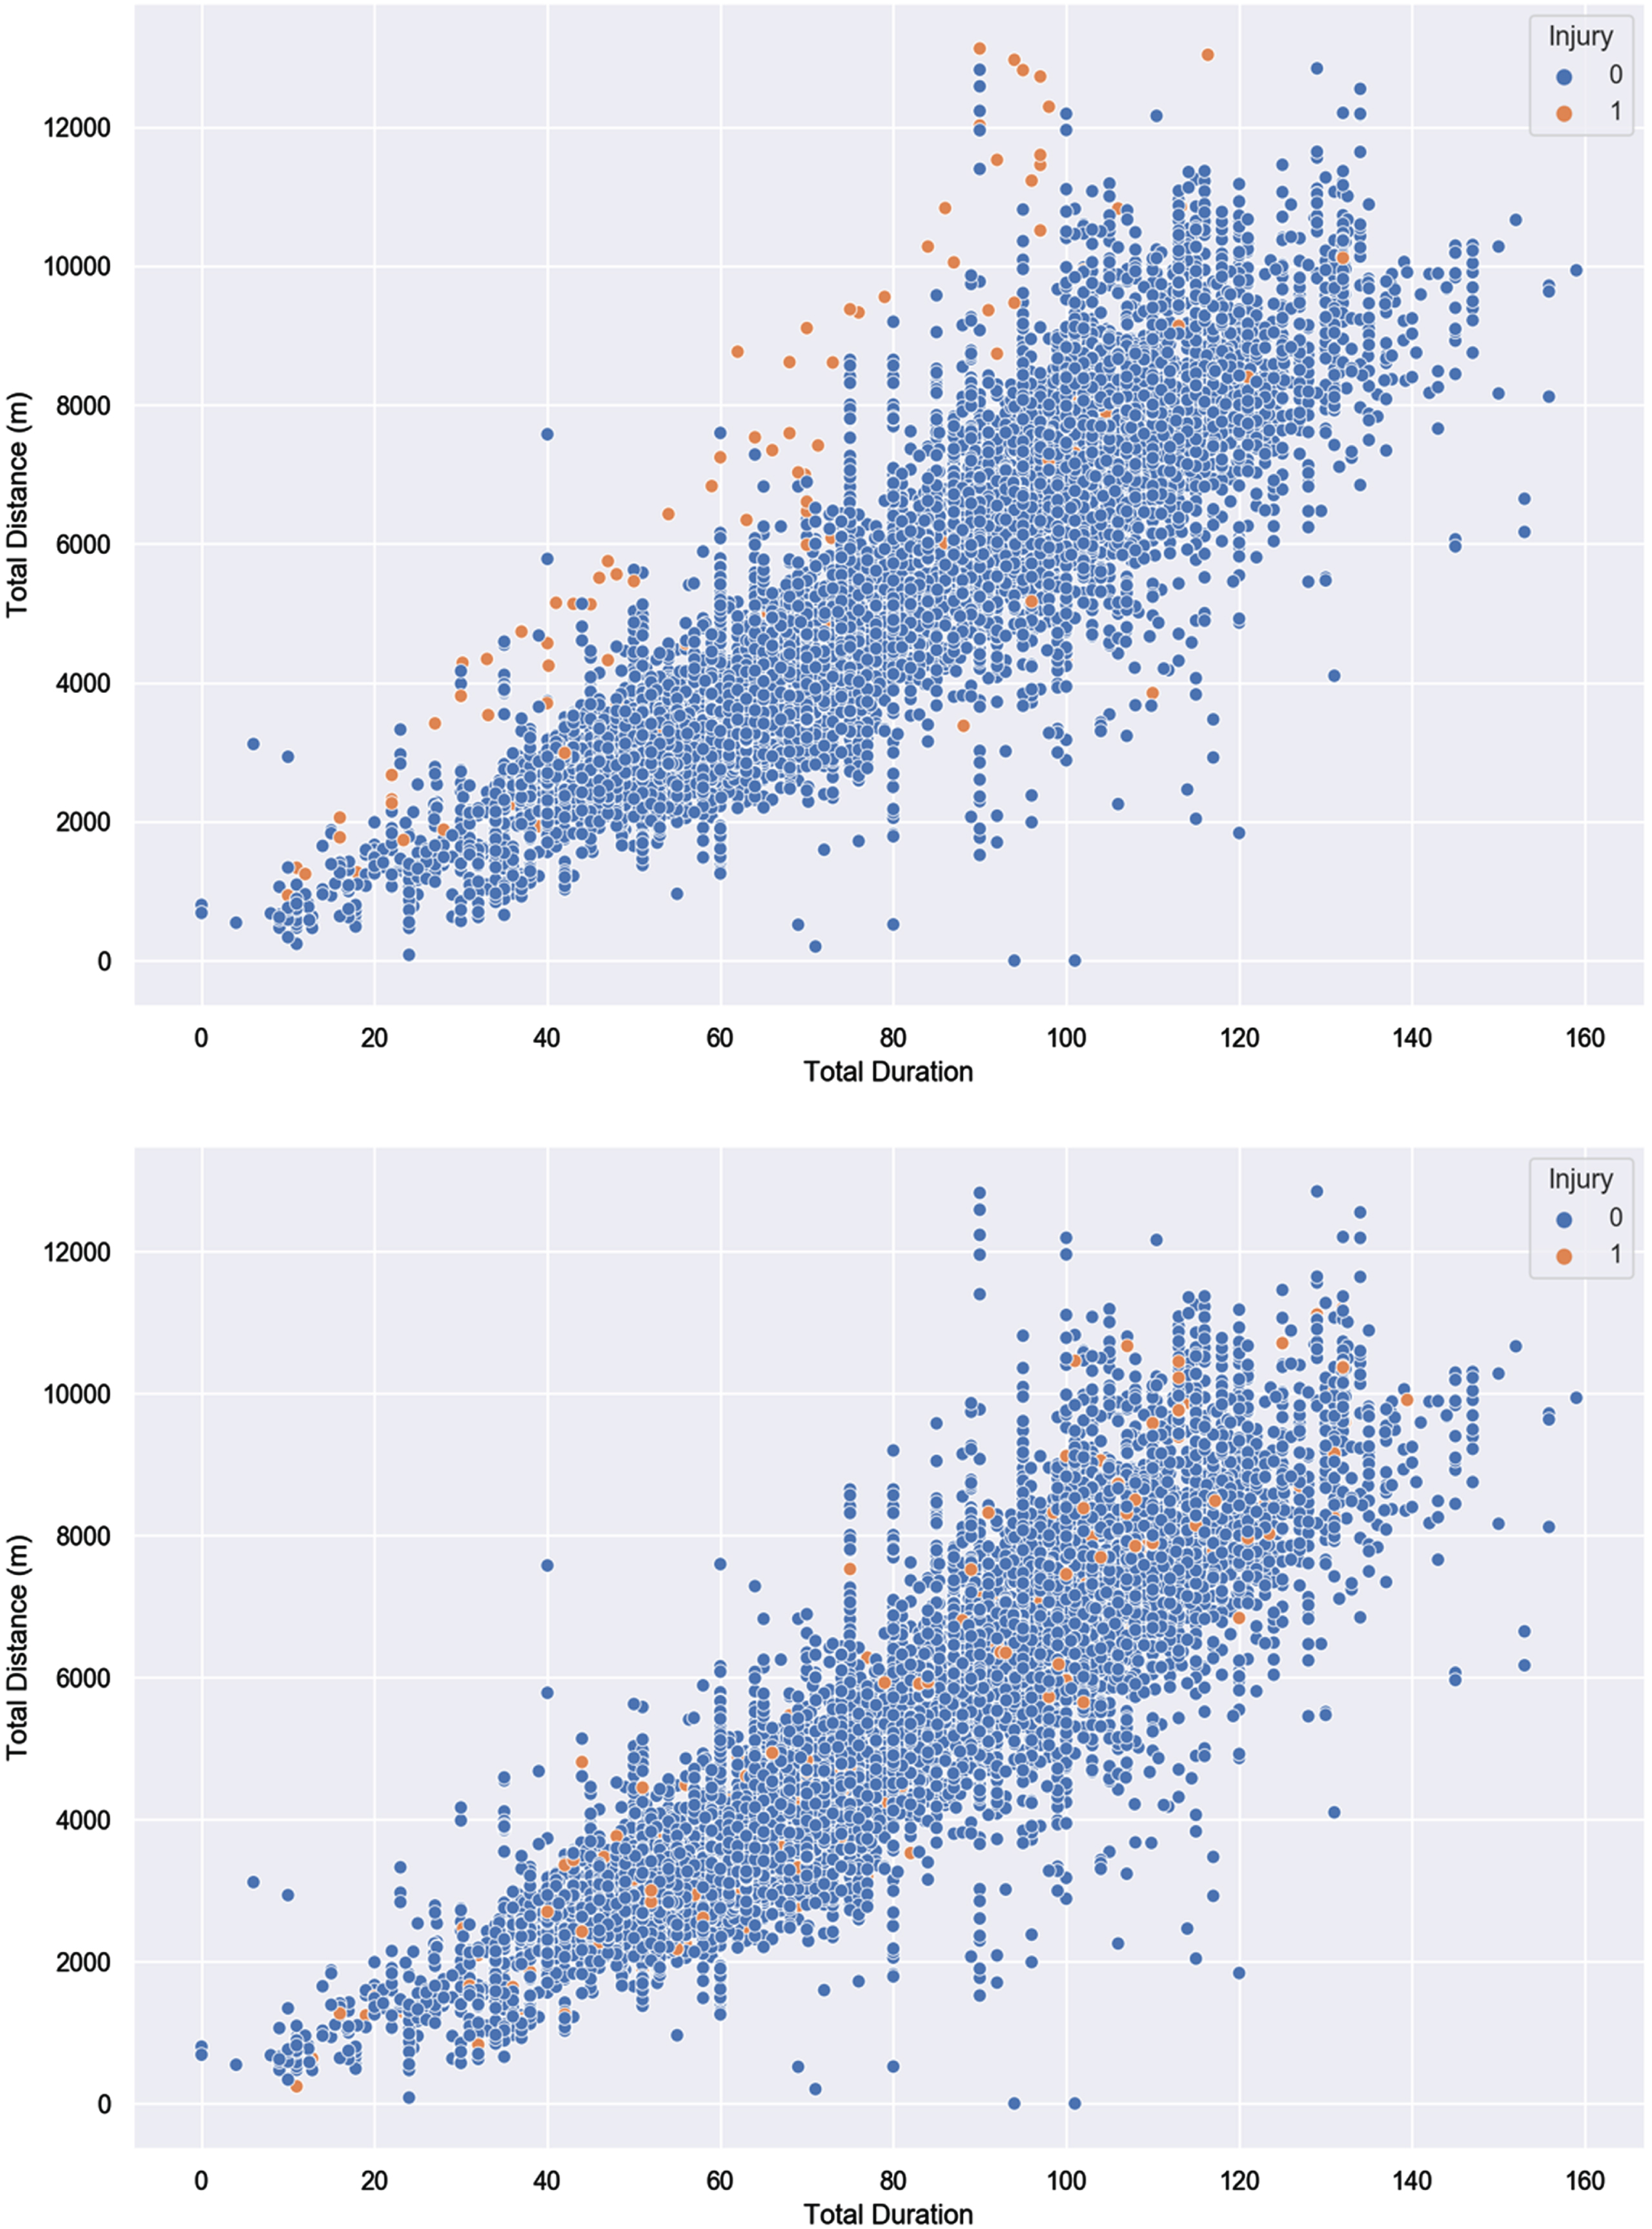 The Relationship Between Graphical Representation of Injury and Non-Injury Distribution in the Original and Seven-Day Injury Prediction Dataset using two training load variables. Note. Top panel: Injury and non-injury distribution in the original dataset. Bottom panel: Injury and non-injury distribution in the seven-day injury prediction dataset. To present the injury and non-injury distribution in both the datasets, total duration and total Distance (m) were used.